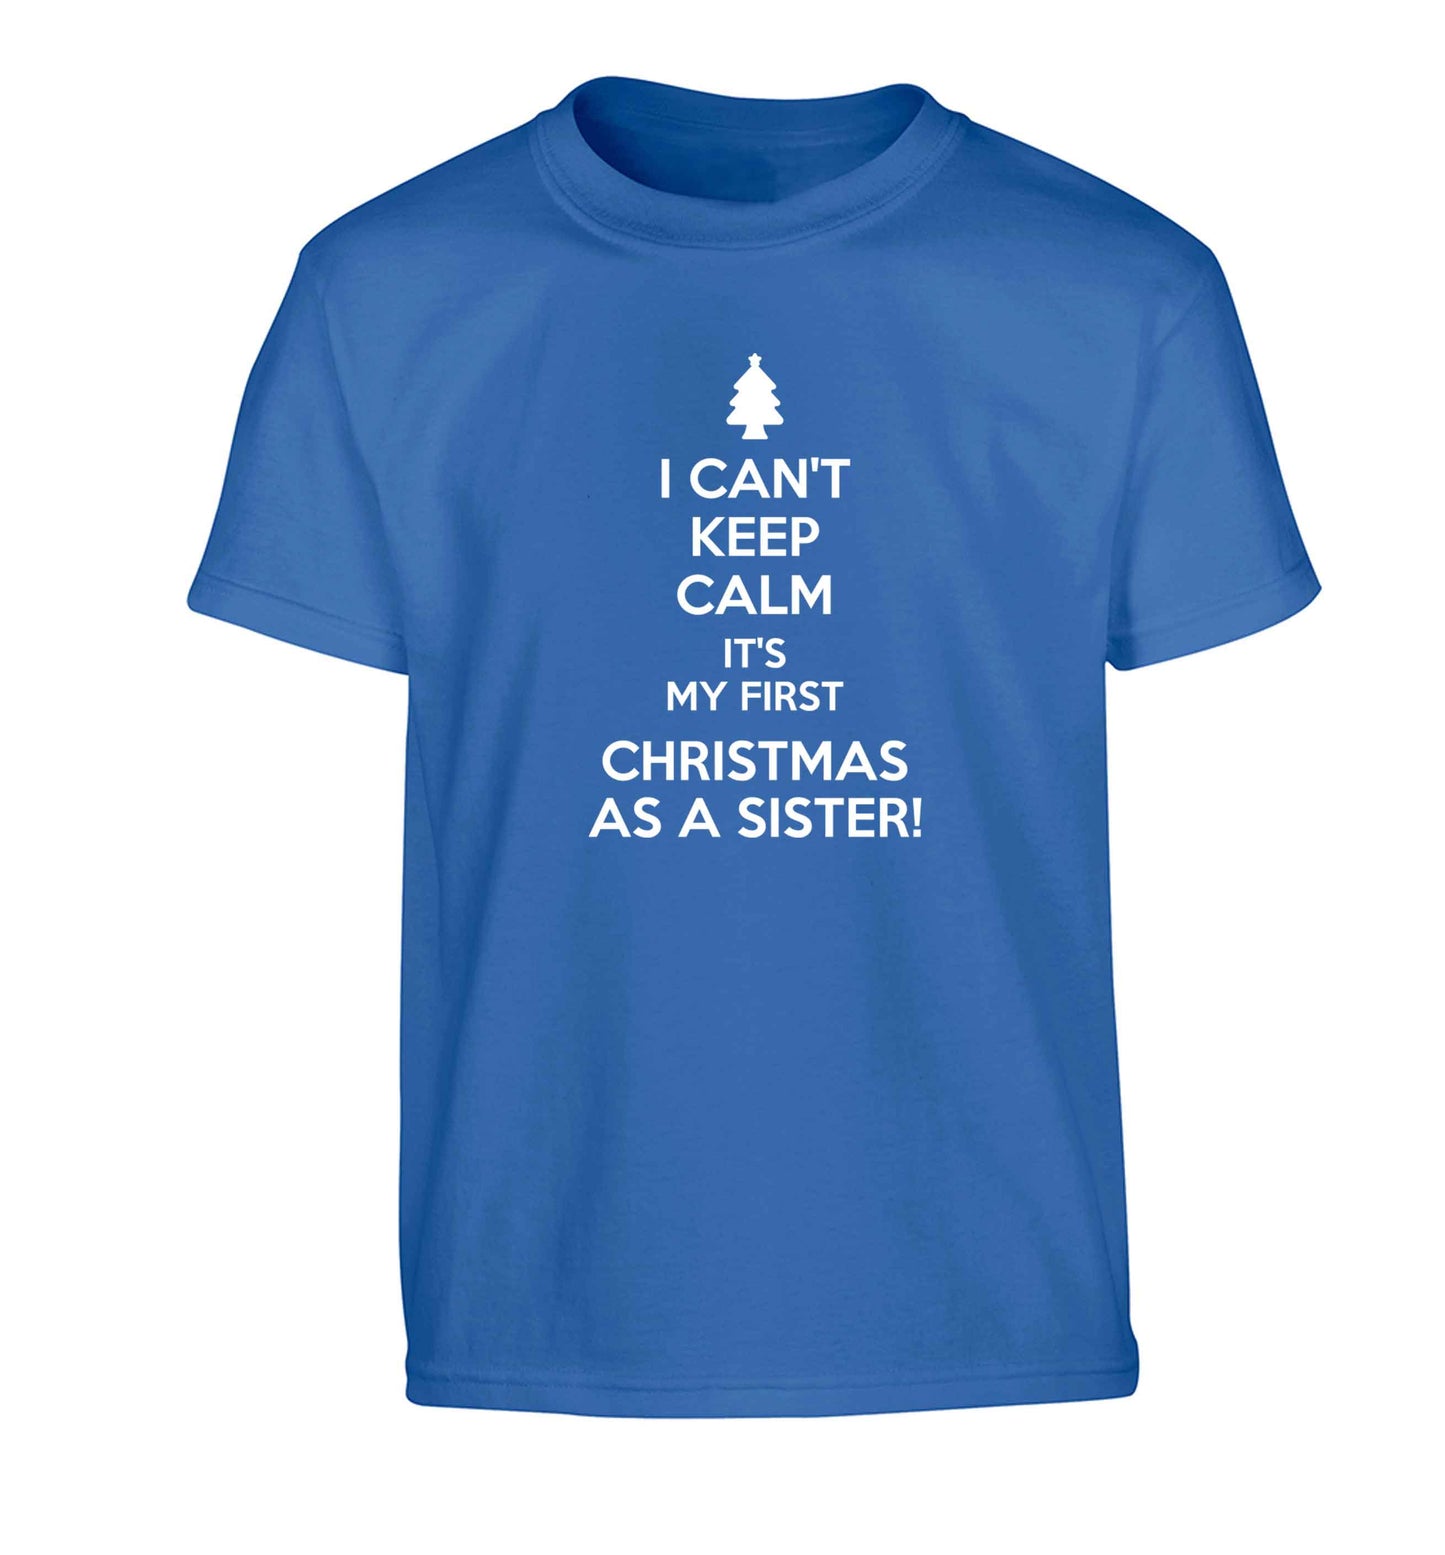 I can't keep calm it's my first Christmas as a sister! Children's blue Tshirt 12-13 Years